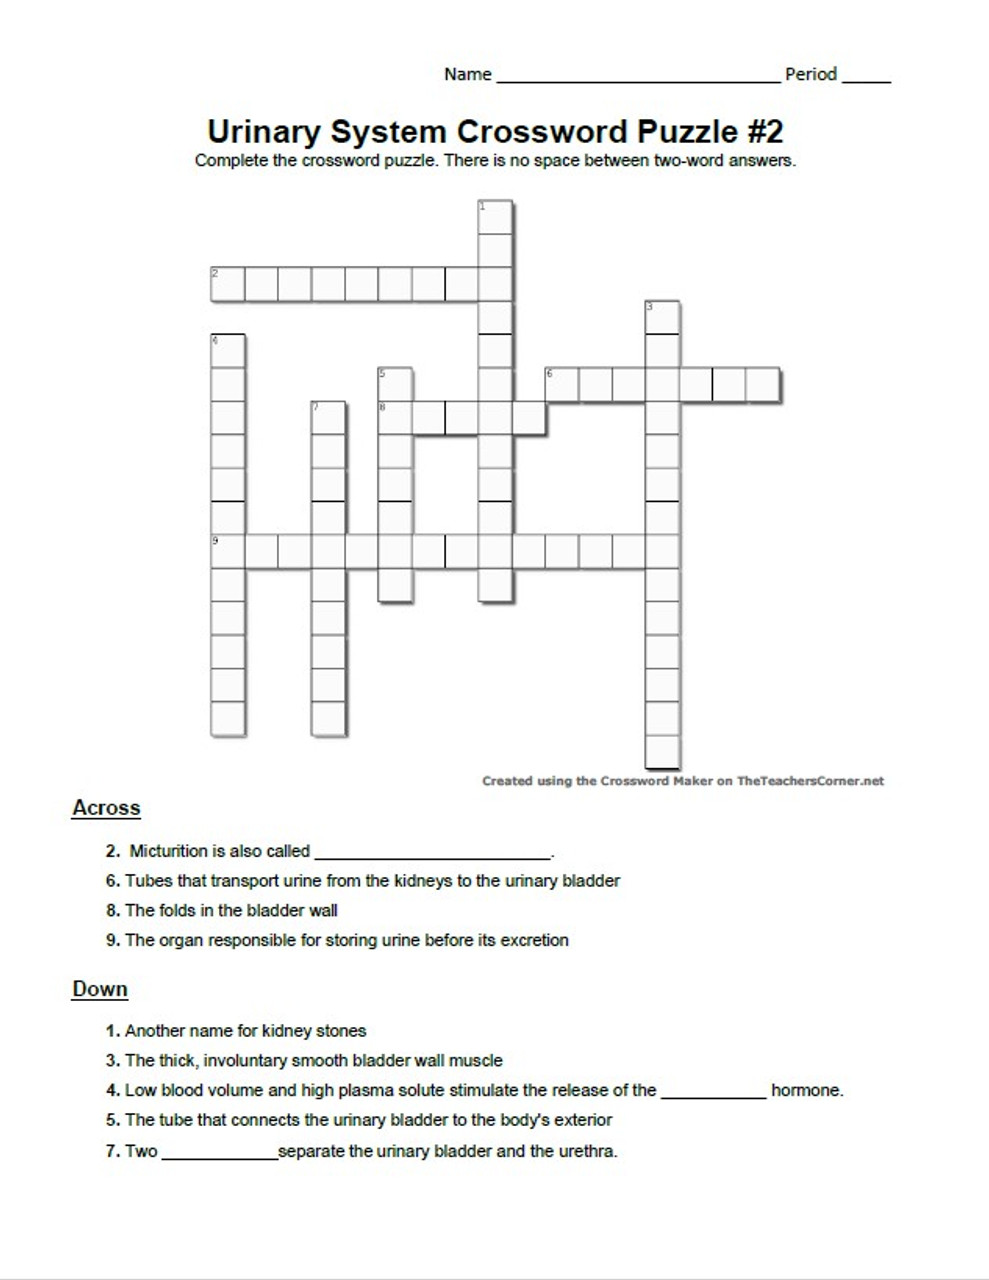 Urinary System Crossword Puzzle Series